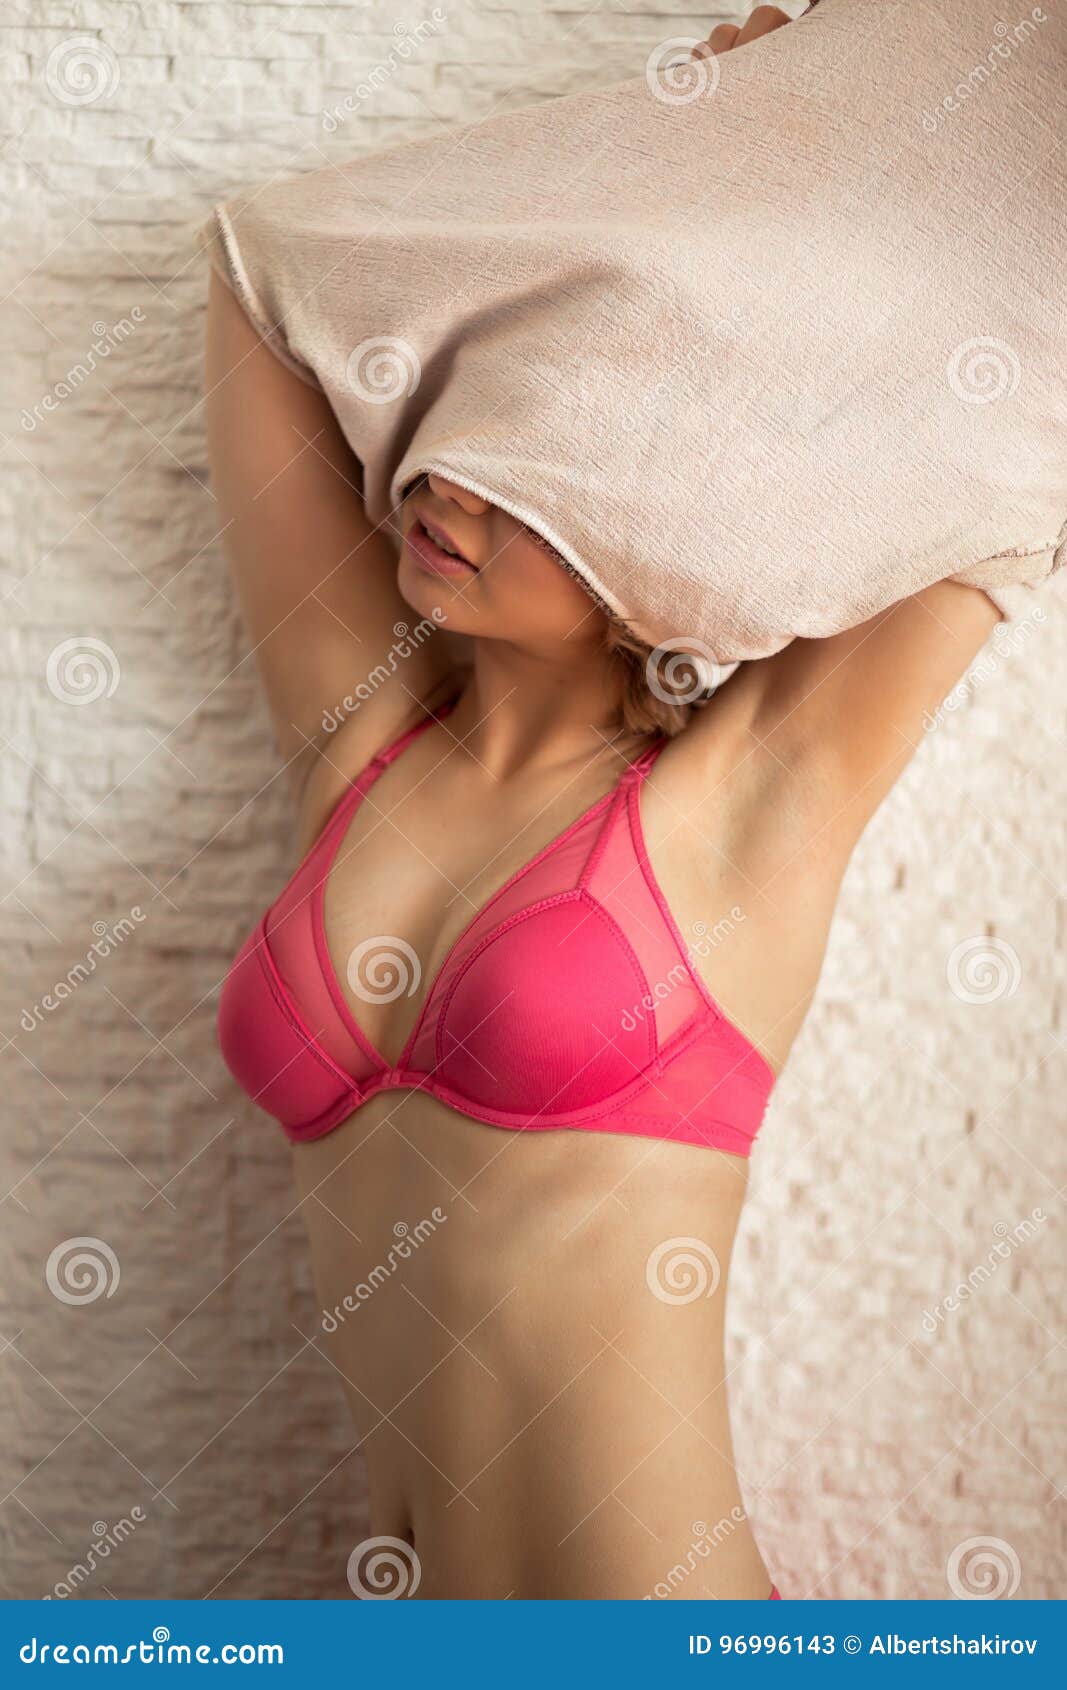 Giving Highland Guggenheim Museum Young Woman In Pink Lingerie Undressing, Over White Stock Photo 96996143 -  Megapixl